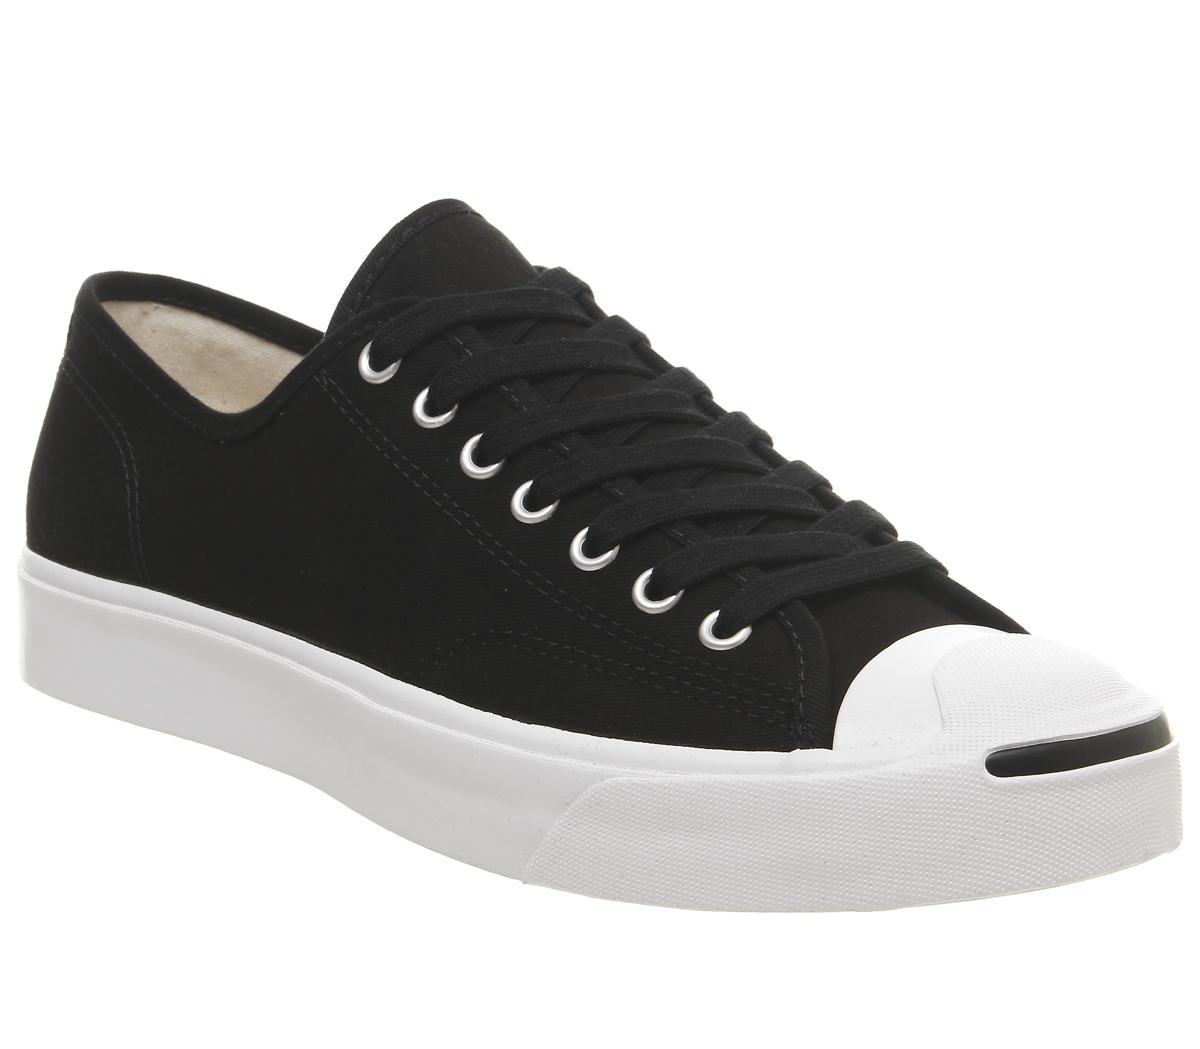 Converse Jack Purcell Trainers Black White - His trainers